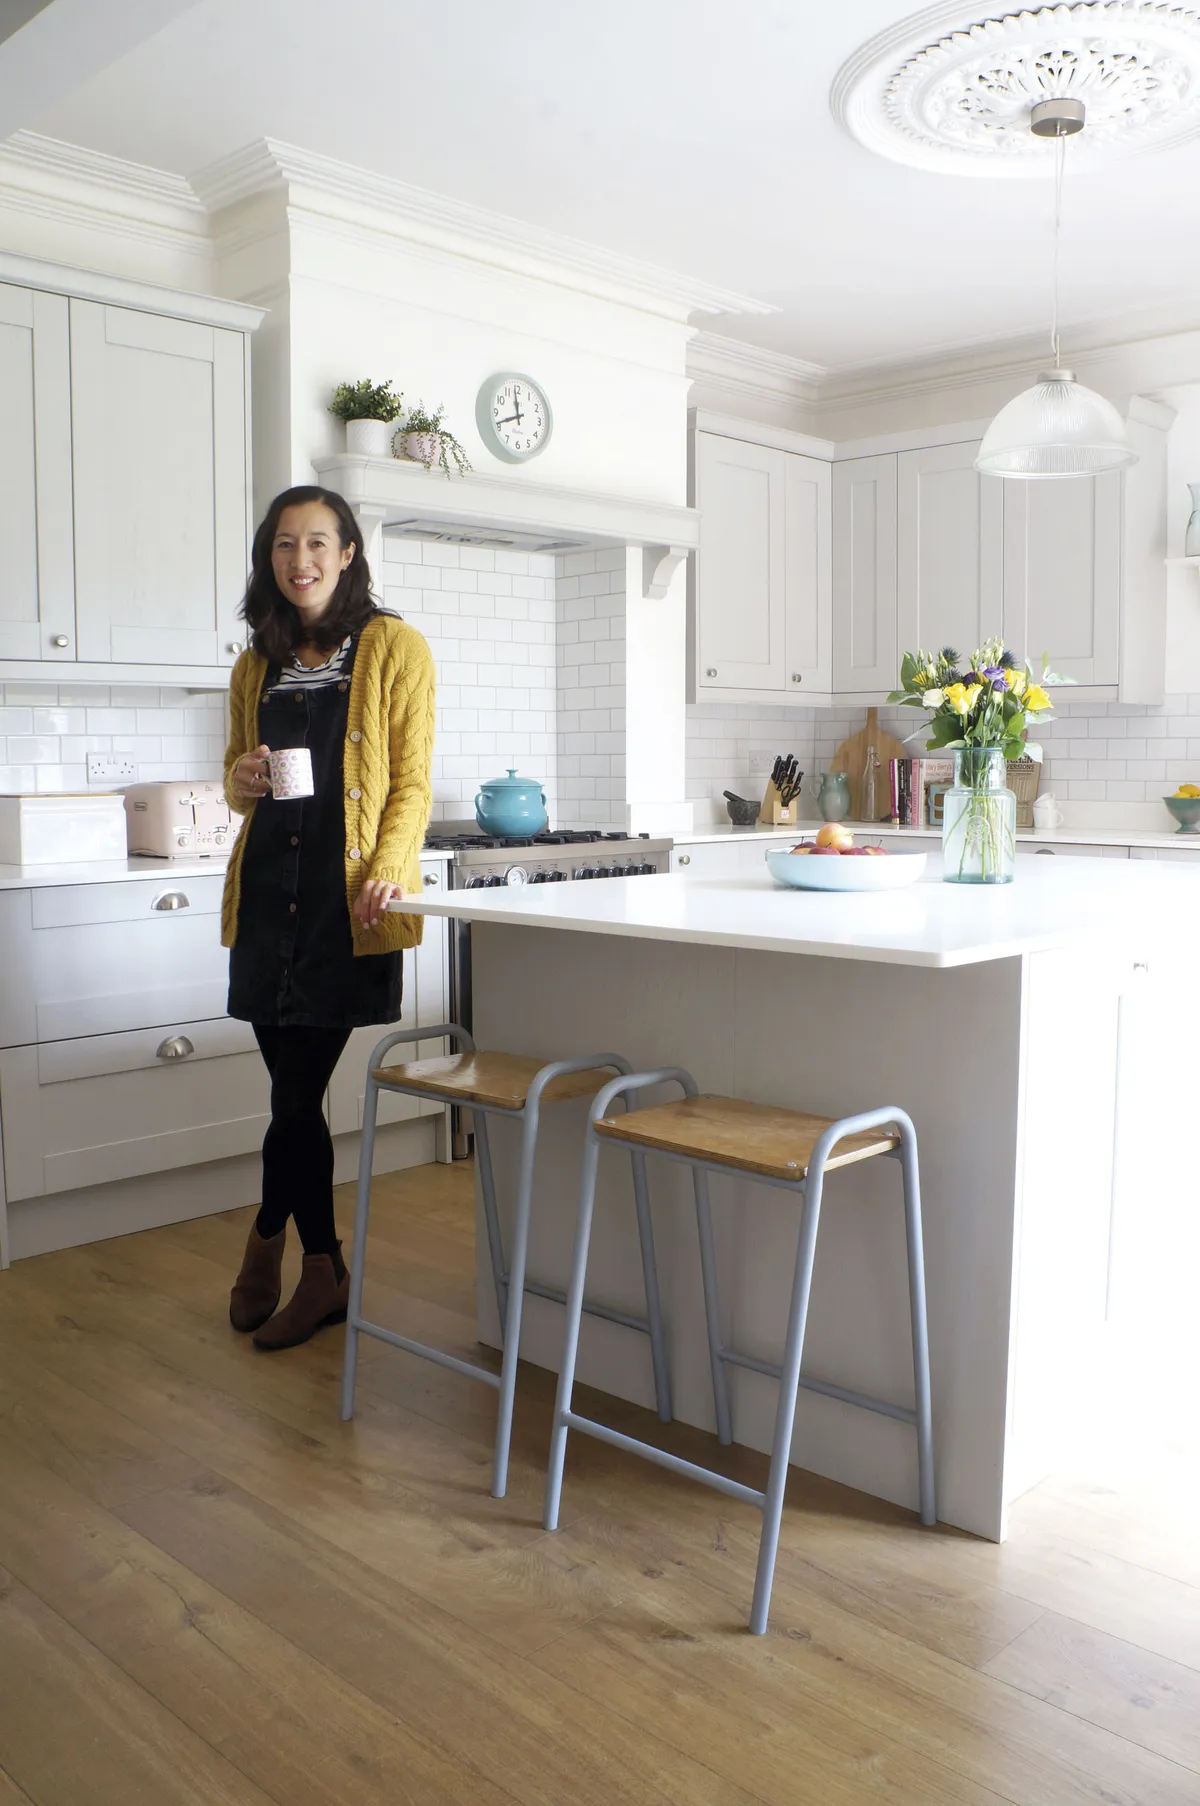 ‘Previously, the kitchen was very small and closed off from the rest of the house – not very practical for family living,’ Jade recalls. ‘Moving it to the middle of the house made more sense, as we could have a large, open-plan space with an island and lots of storage.’